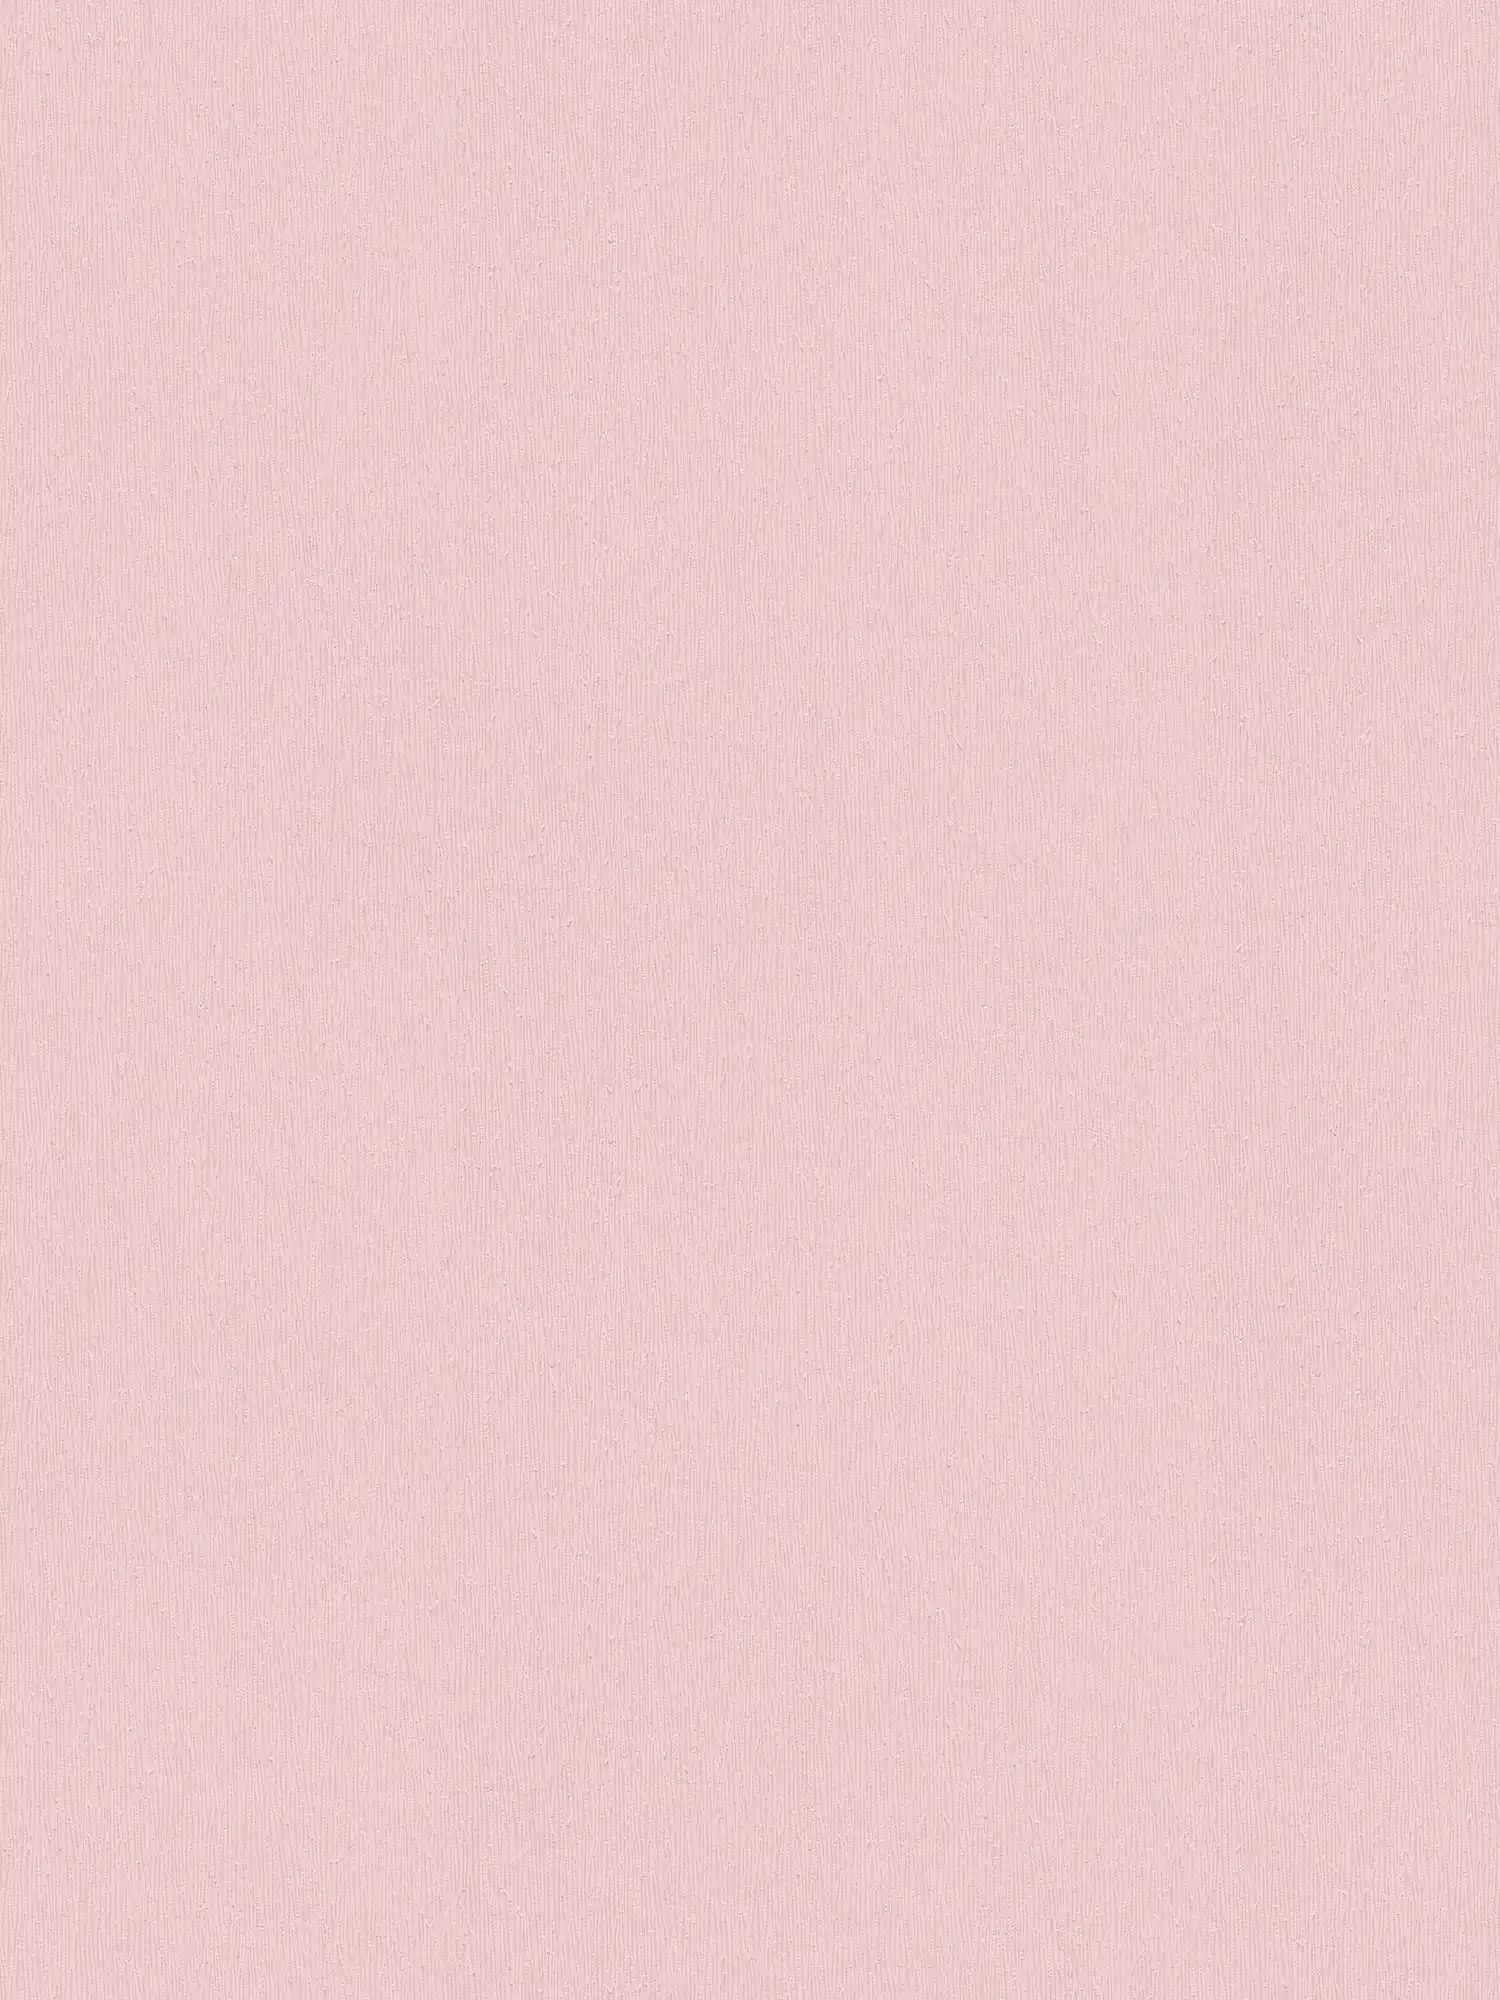 Baby pink non-woven wallpaper with plain texture design - pink
